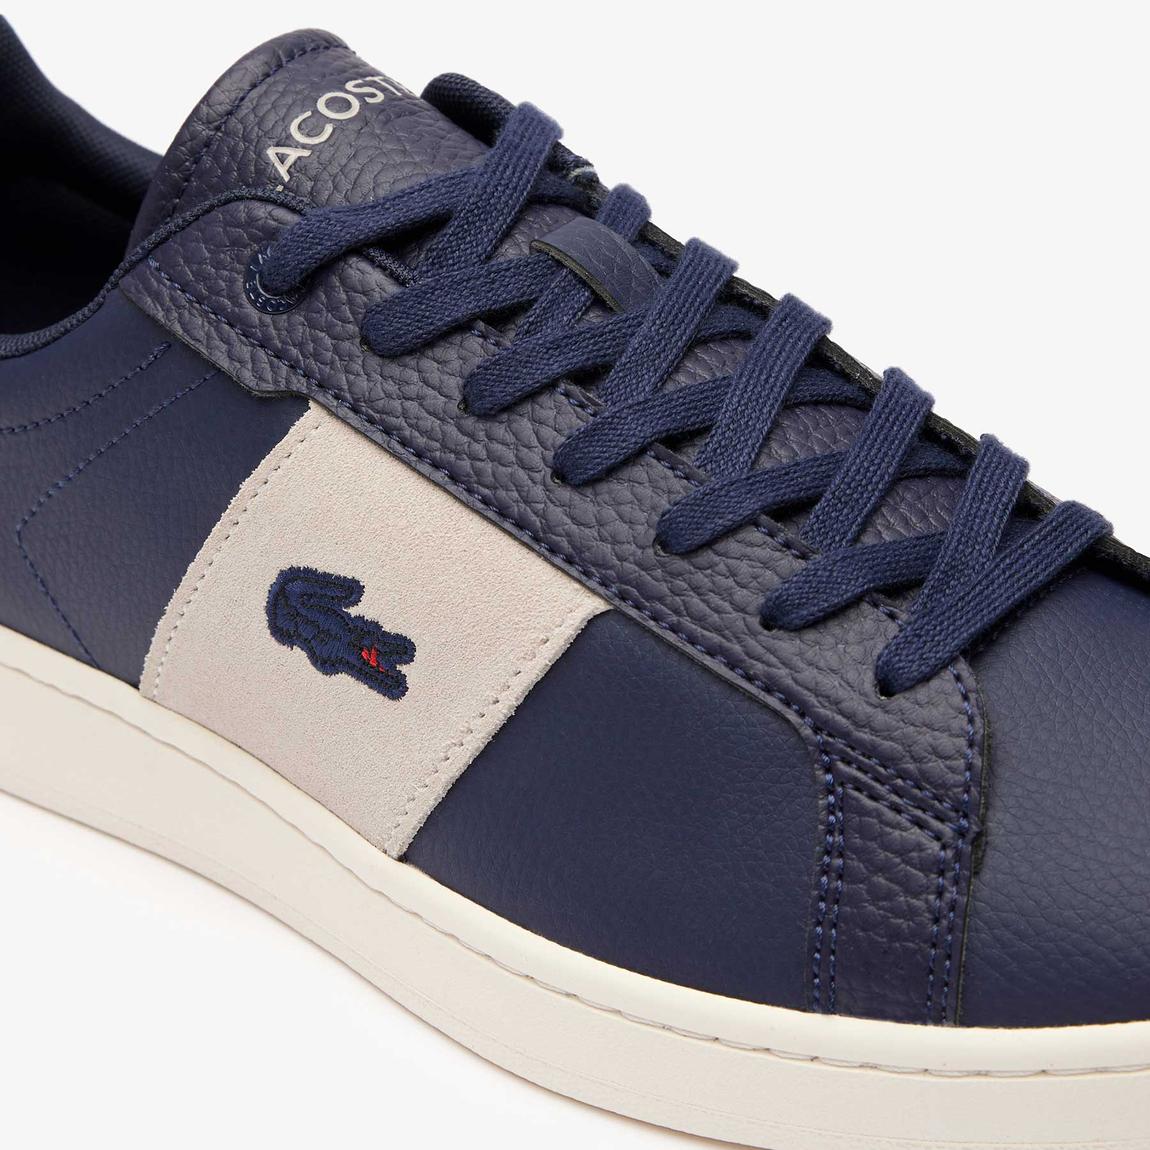 Carnaby Pro 2233 Sneakers Navy Blue/Off White Leather